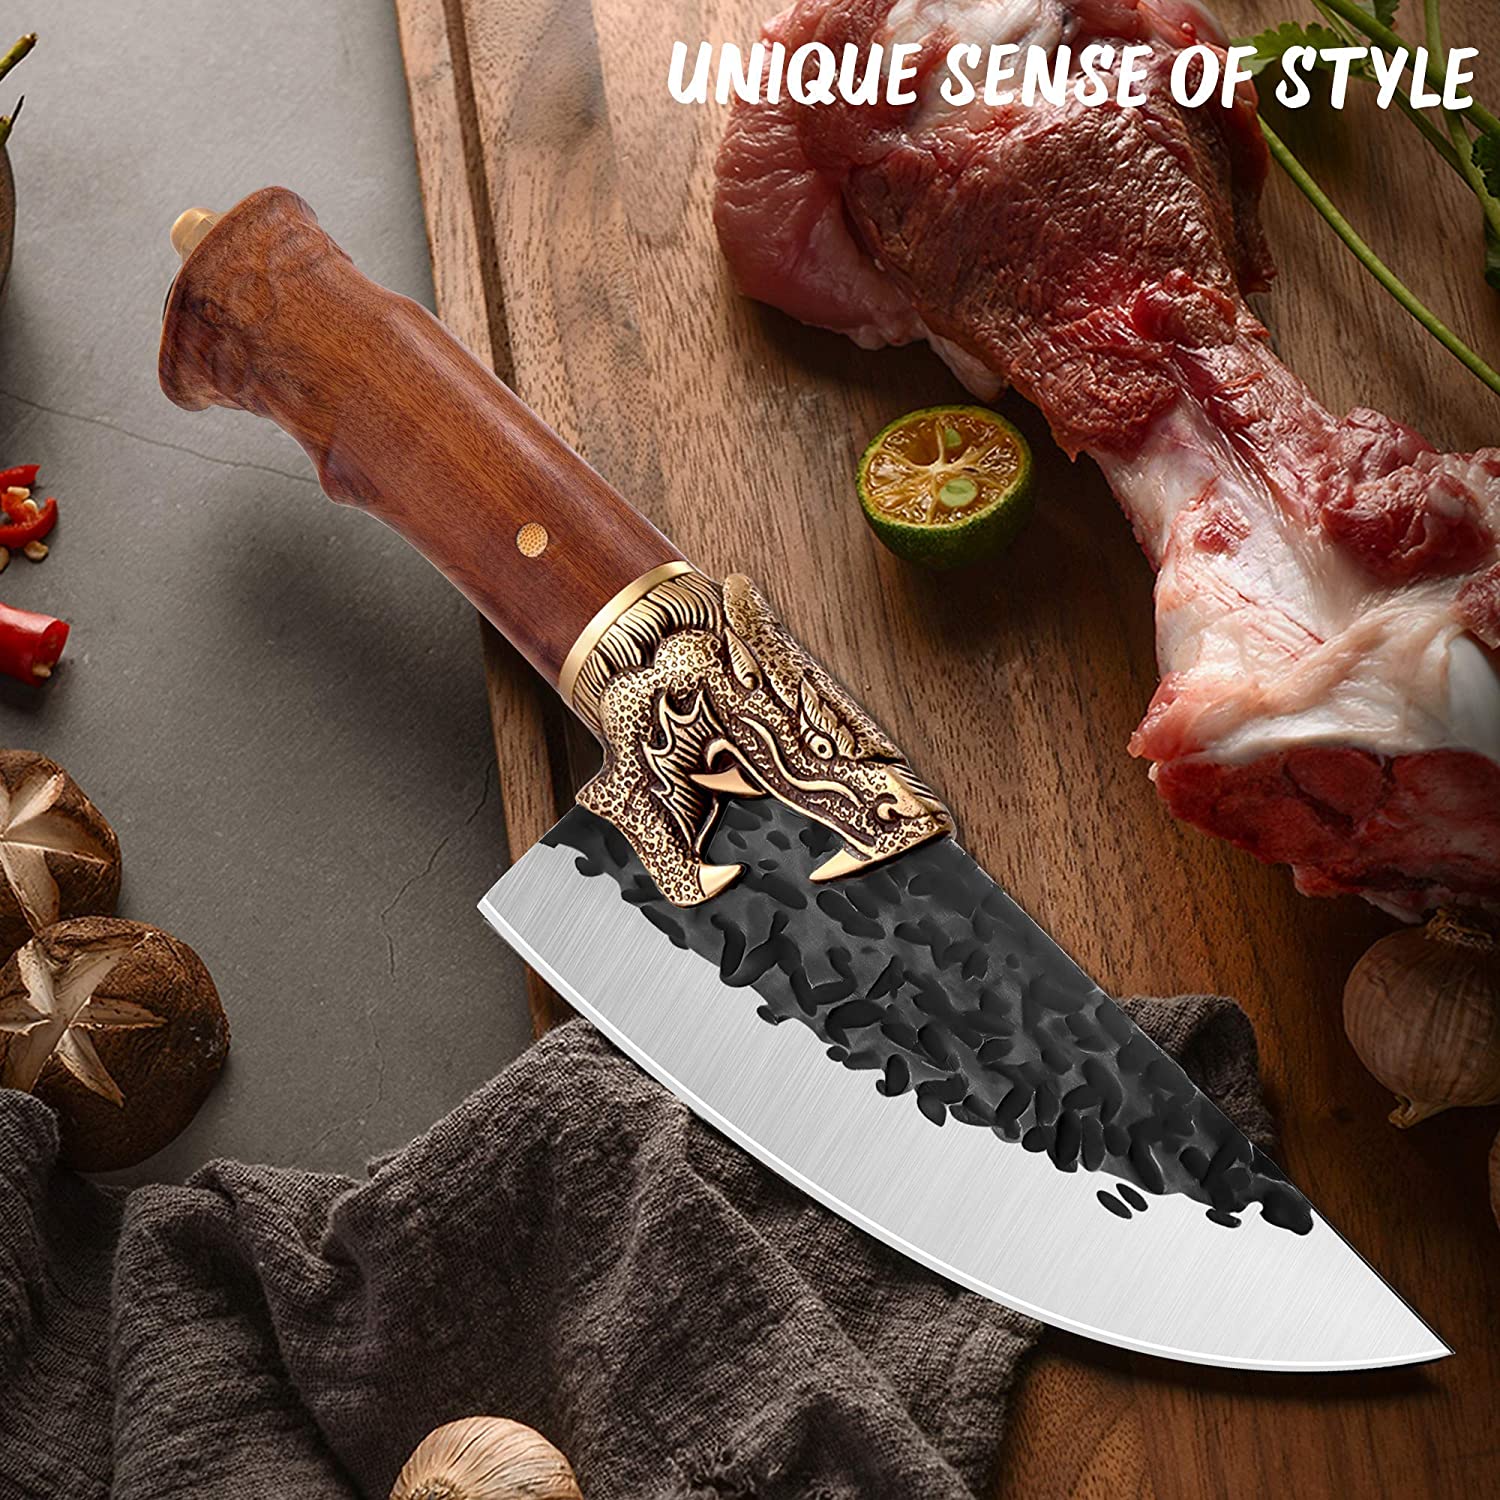 Dragon Series Meat Cleaver Knife – HAND FORGED KNIFE